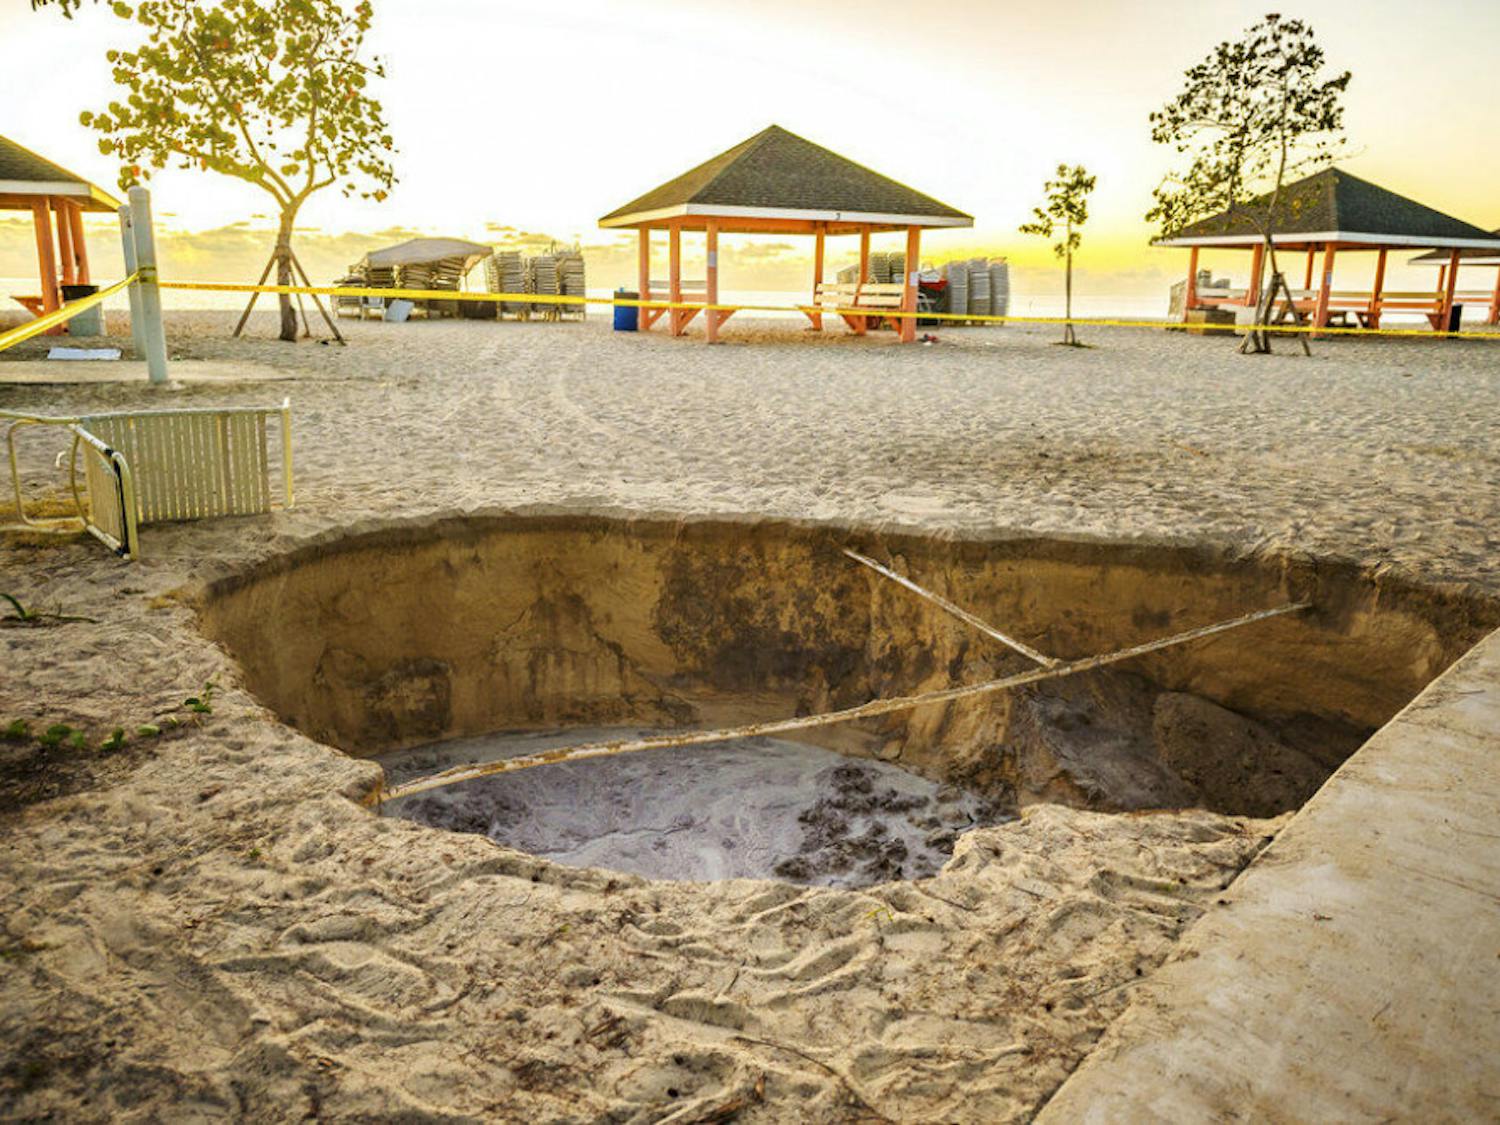 A sinkhole is surrounded by police tape after it appeared when a powerful magnitude 7.7 earthquake struck in the Caribbean Sea between Jamaica and eastern Cuba, at Public Beach on West Bay, Grand Cayman, Tuesday, Jan. 28, 2020. The quake also hit the Cayman Islands, leaving cracked roads and what appeared to be sewage spilling from cracked mains. There were no immediate reports of deaths, injuries or more severe damage. (Taneos Ramsay/Cayman Compass via AP)